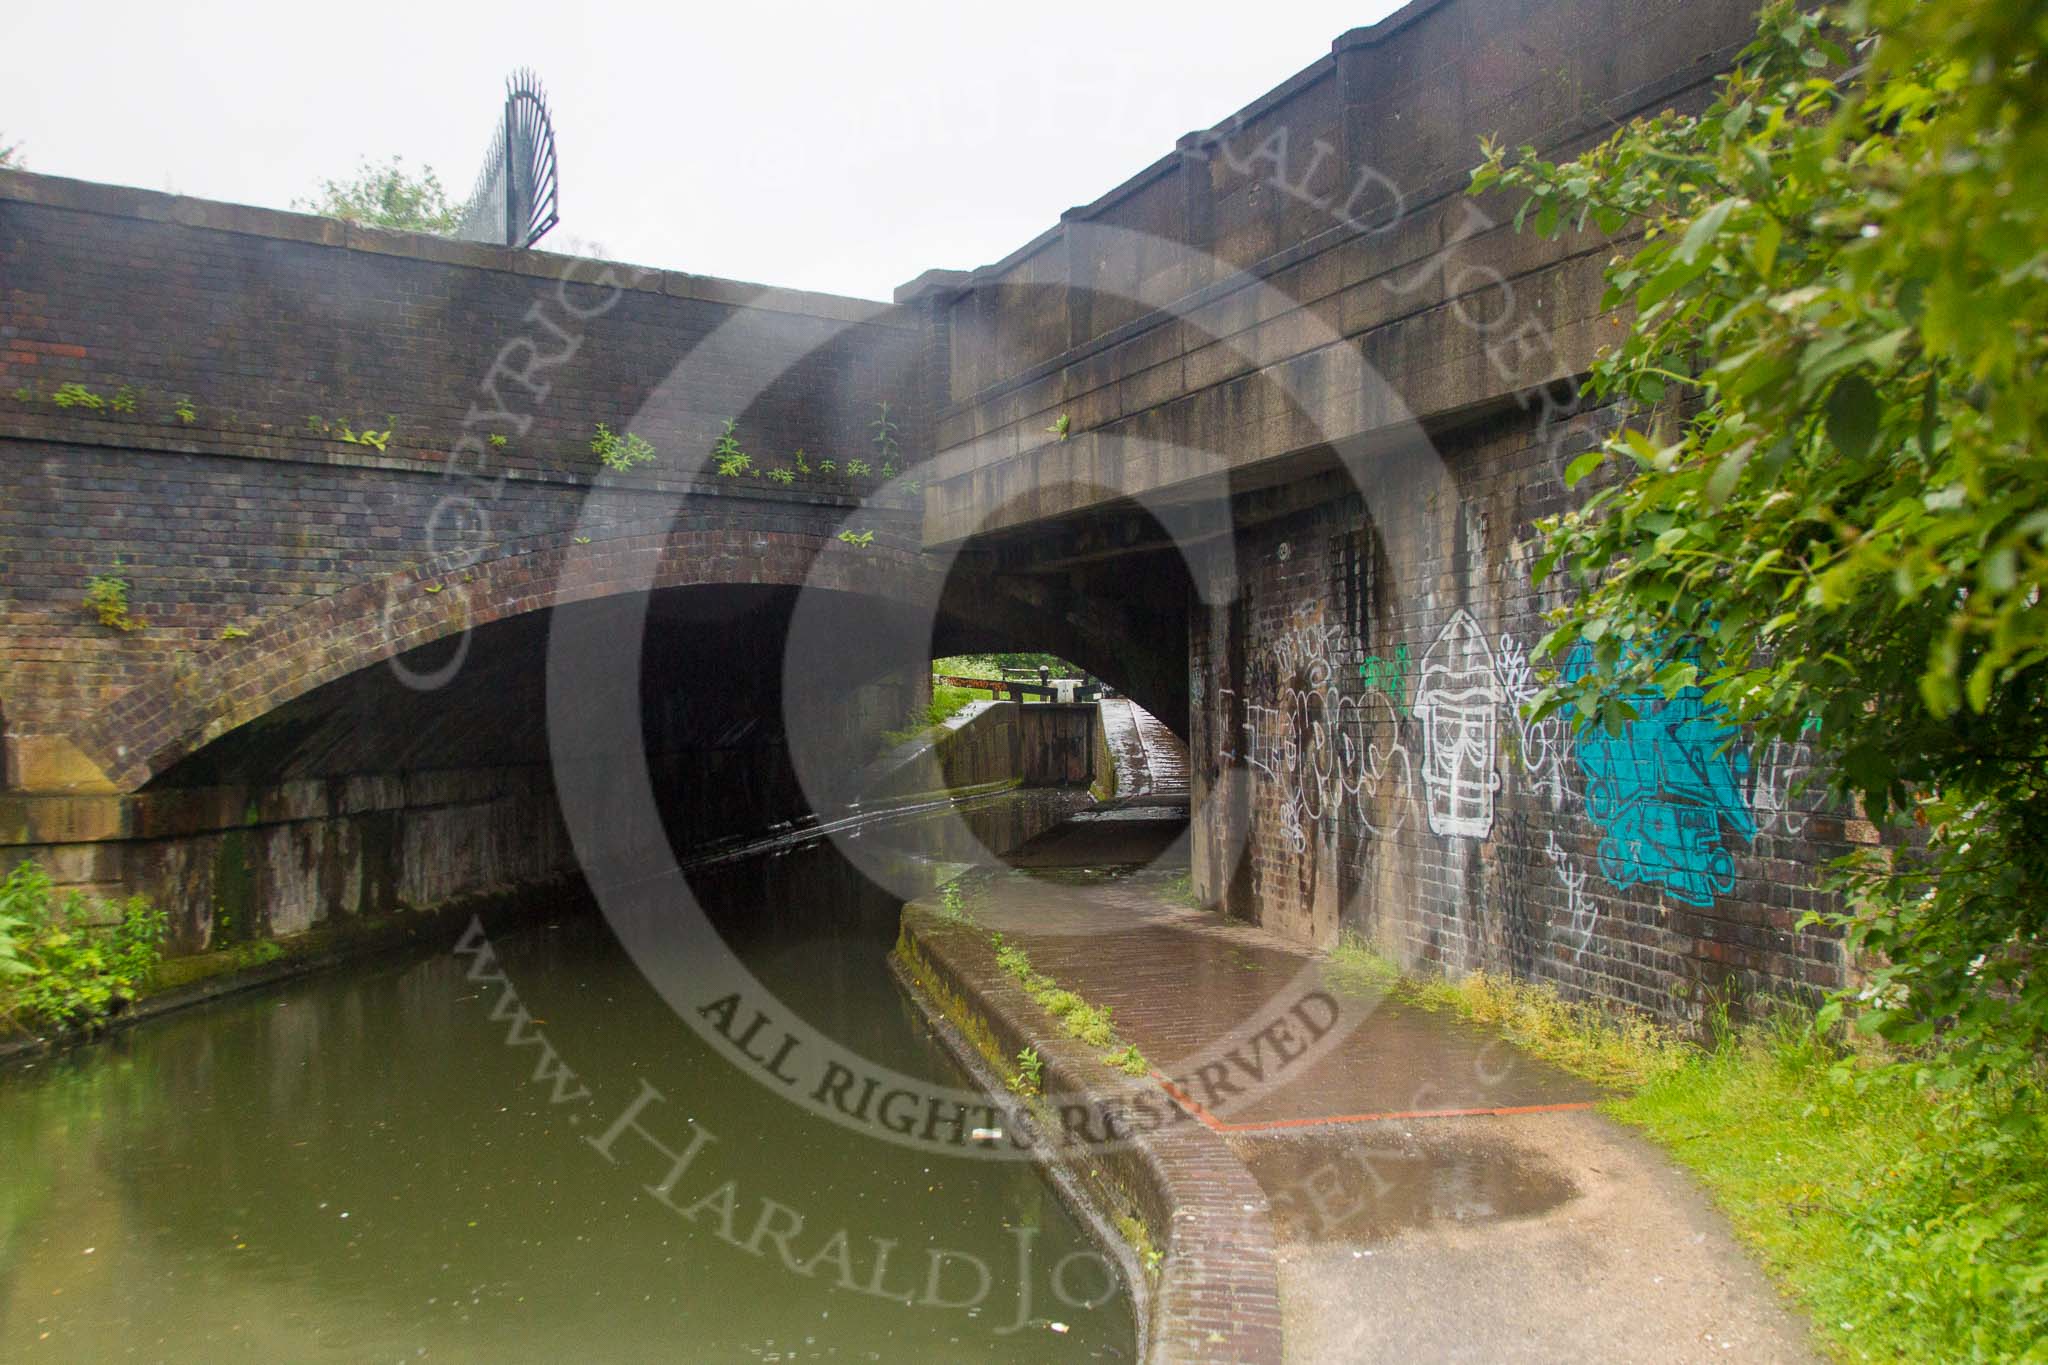 BCN Marathon Challenge 2014: Bridge 104 at Garrison Locks on the Grand Union Canal. Two bridges in one - the older brick structure on the left, and the newer concrete bridge built right through it.
Birmingham Canal Navigation,


United Kingdom,
on 24 May 2014 at 09:02, image #81